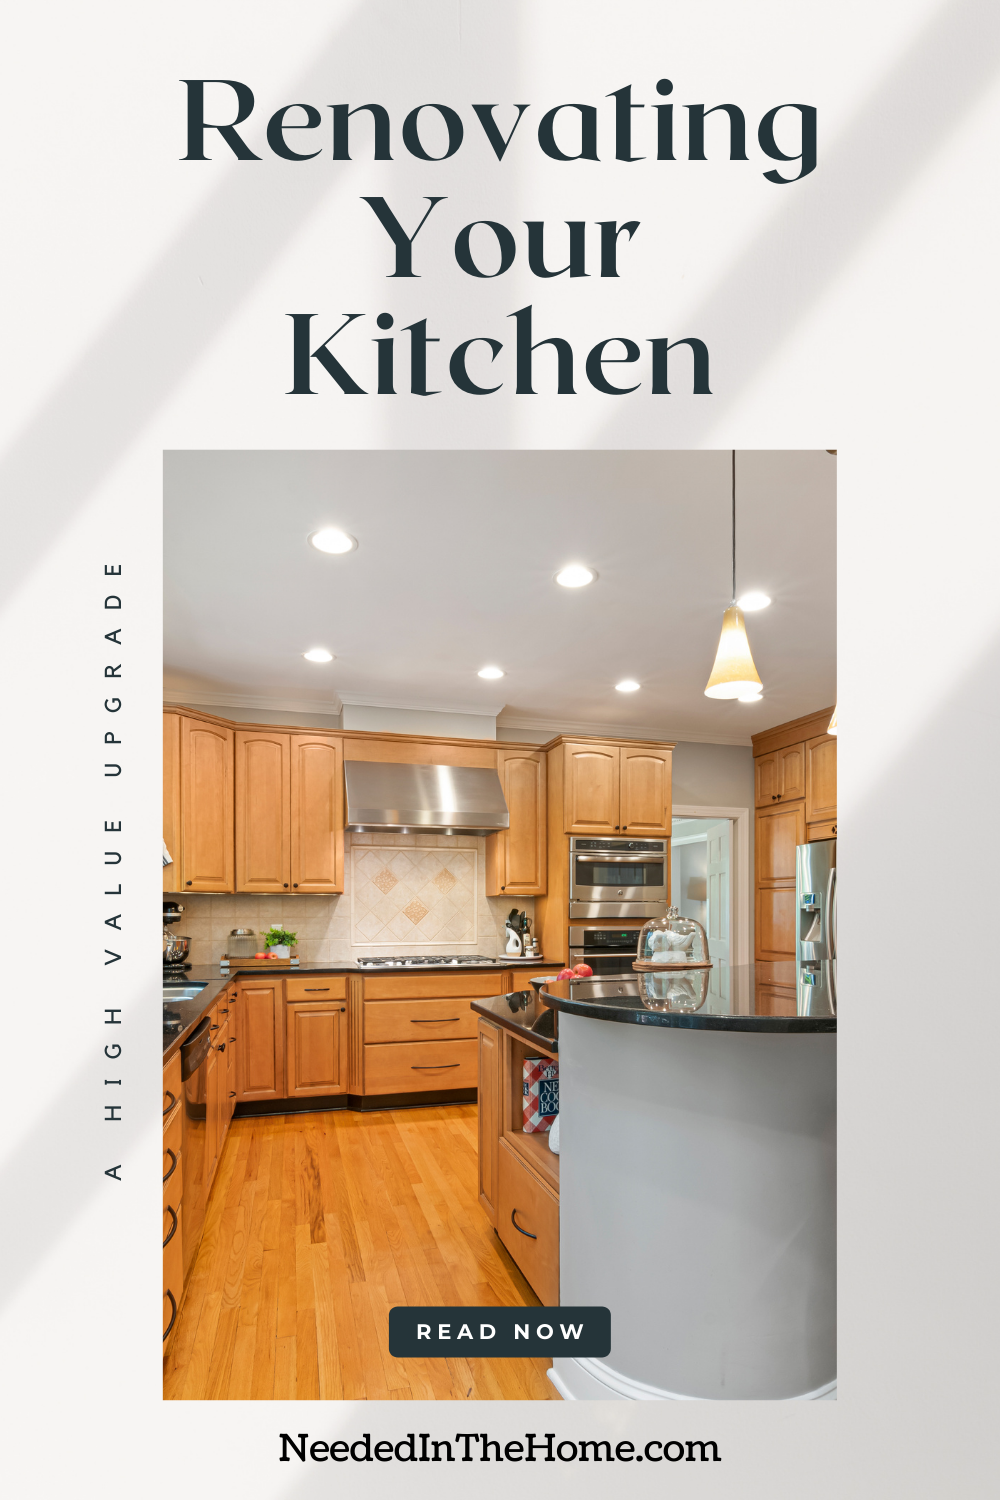 pinterest-pin-description renovating your kitchen a high value upgrade read now button on photo of upgraded kitchen neededinthehome